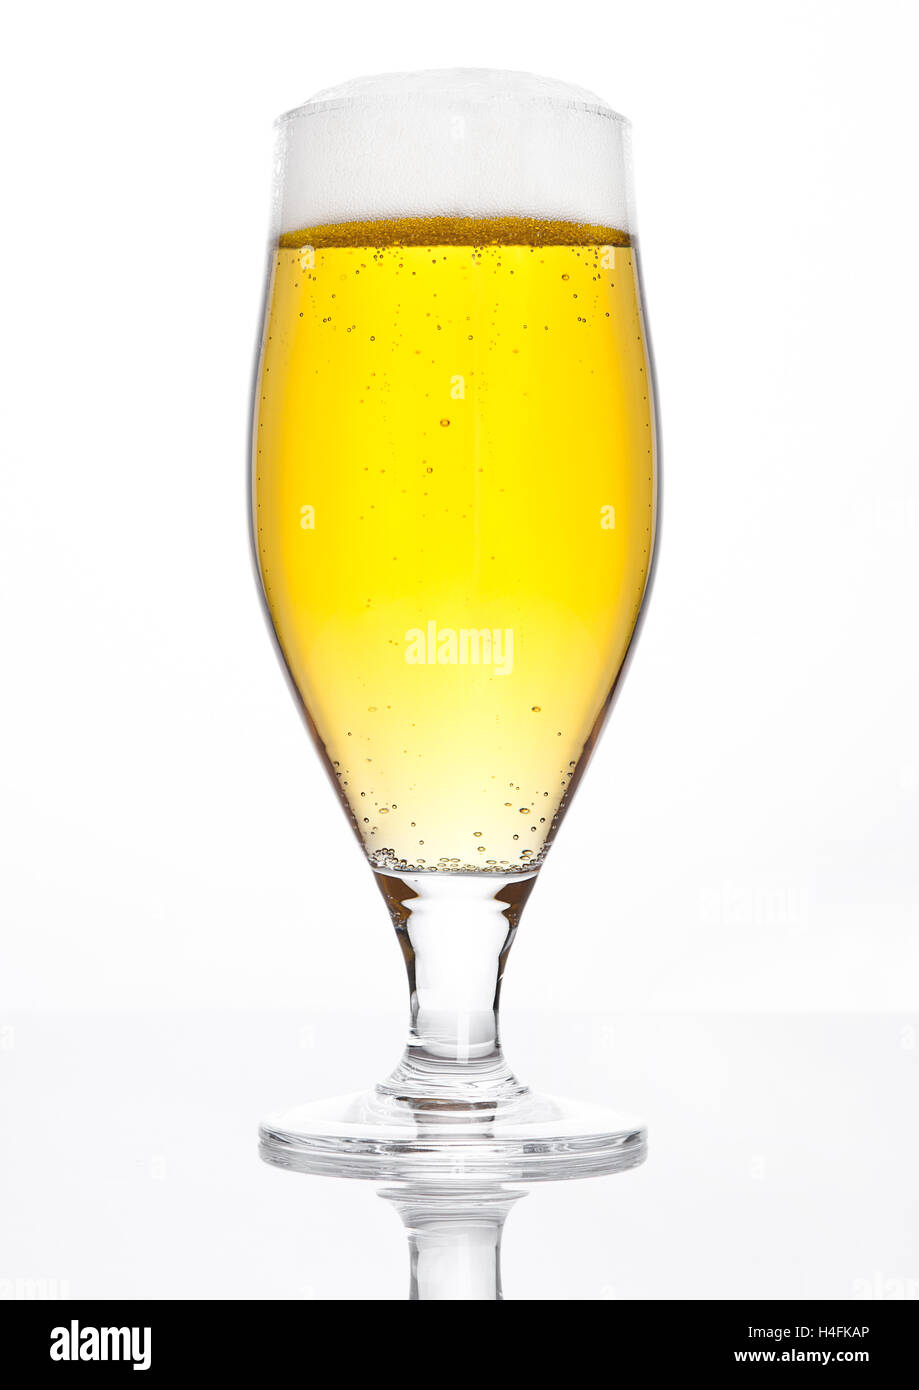 Glass of beer cider with foam golden color on white background Stock Photo